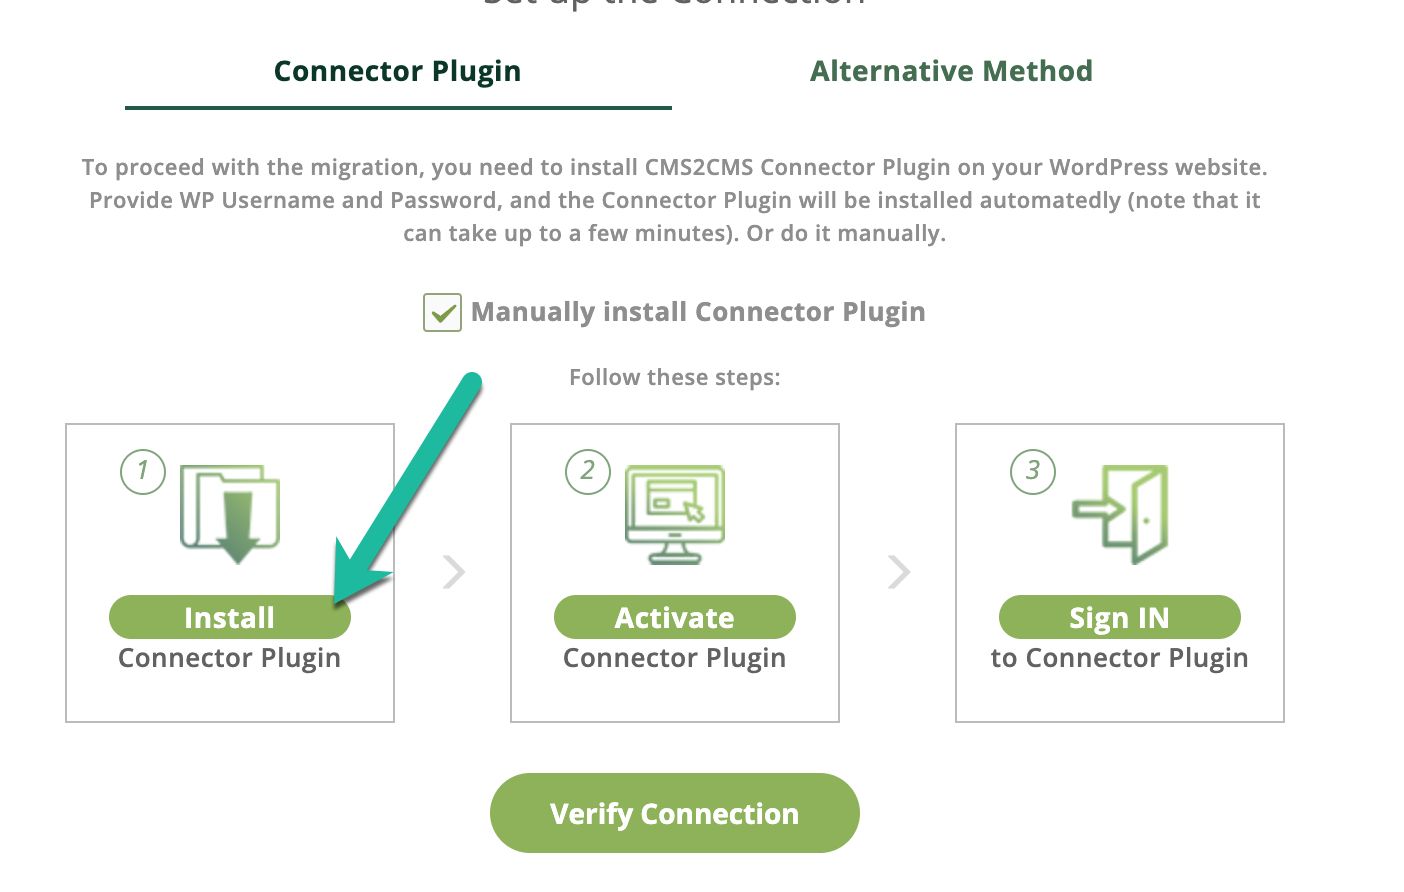 To install manually, check the box next to Manually Install Connector Plugin with your URL in the box next to Provide Site URL then click on Install to open a new page to your new WordPress admin page.